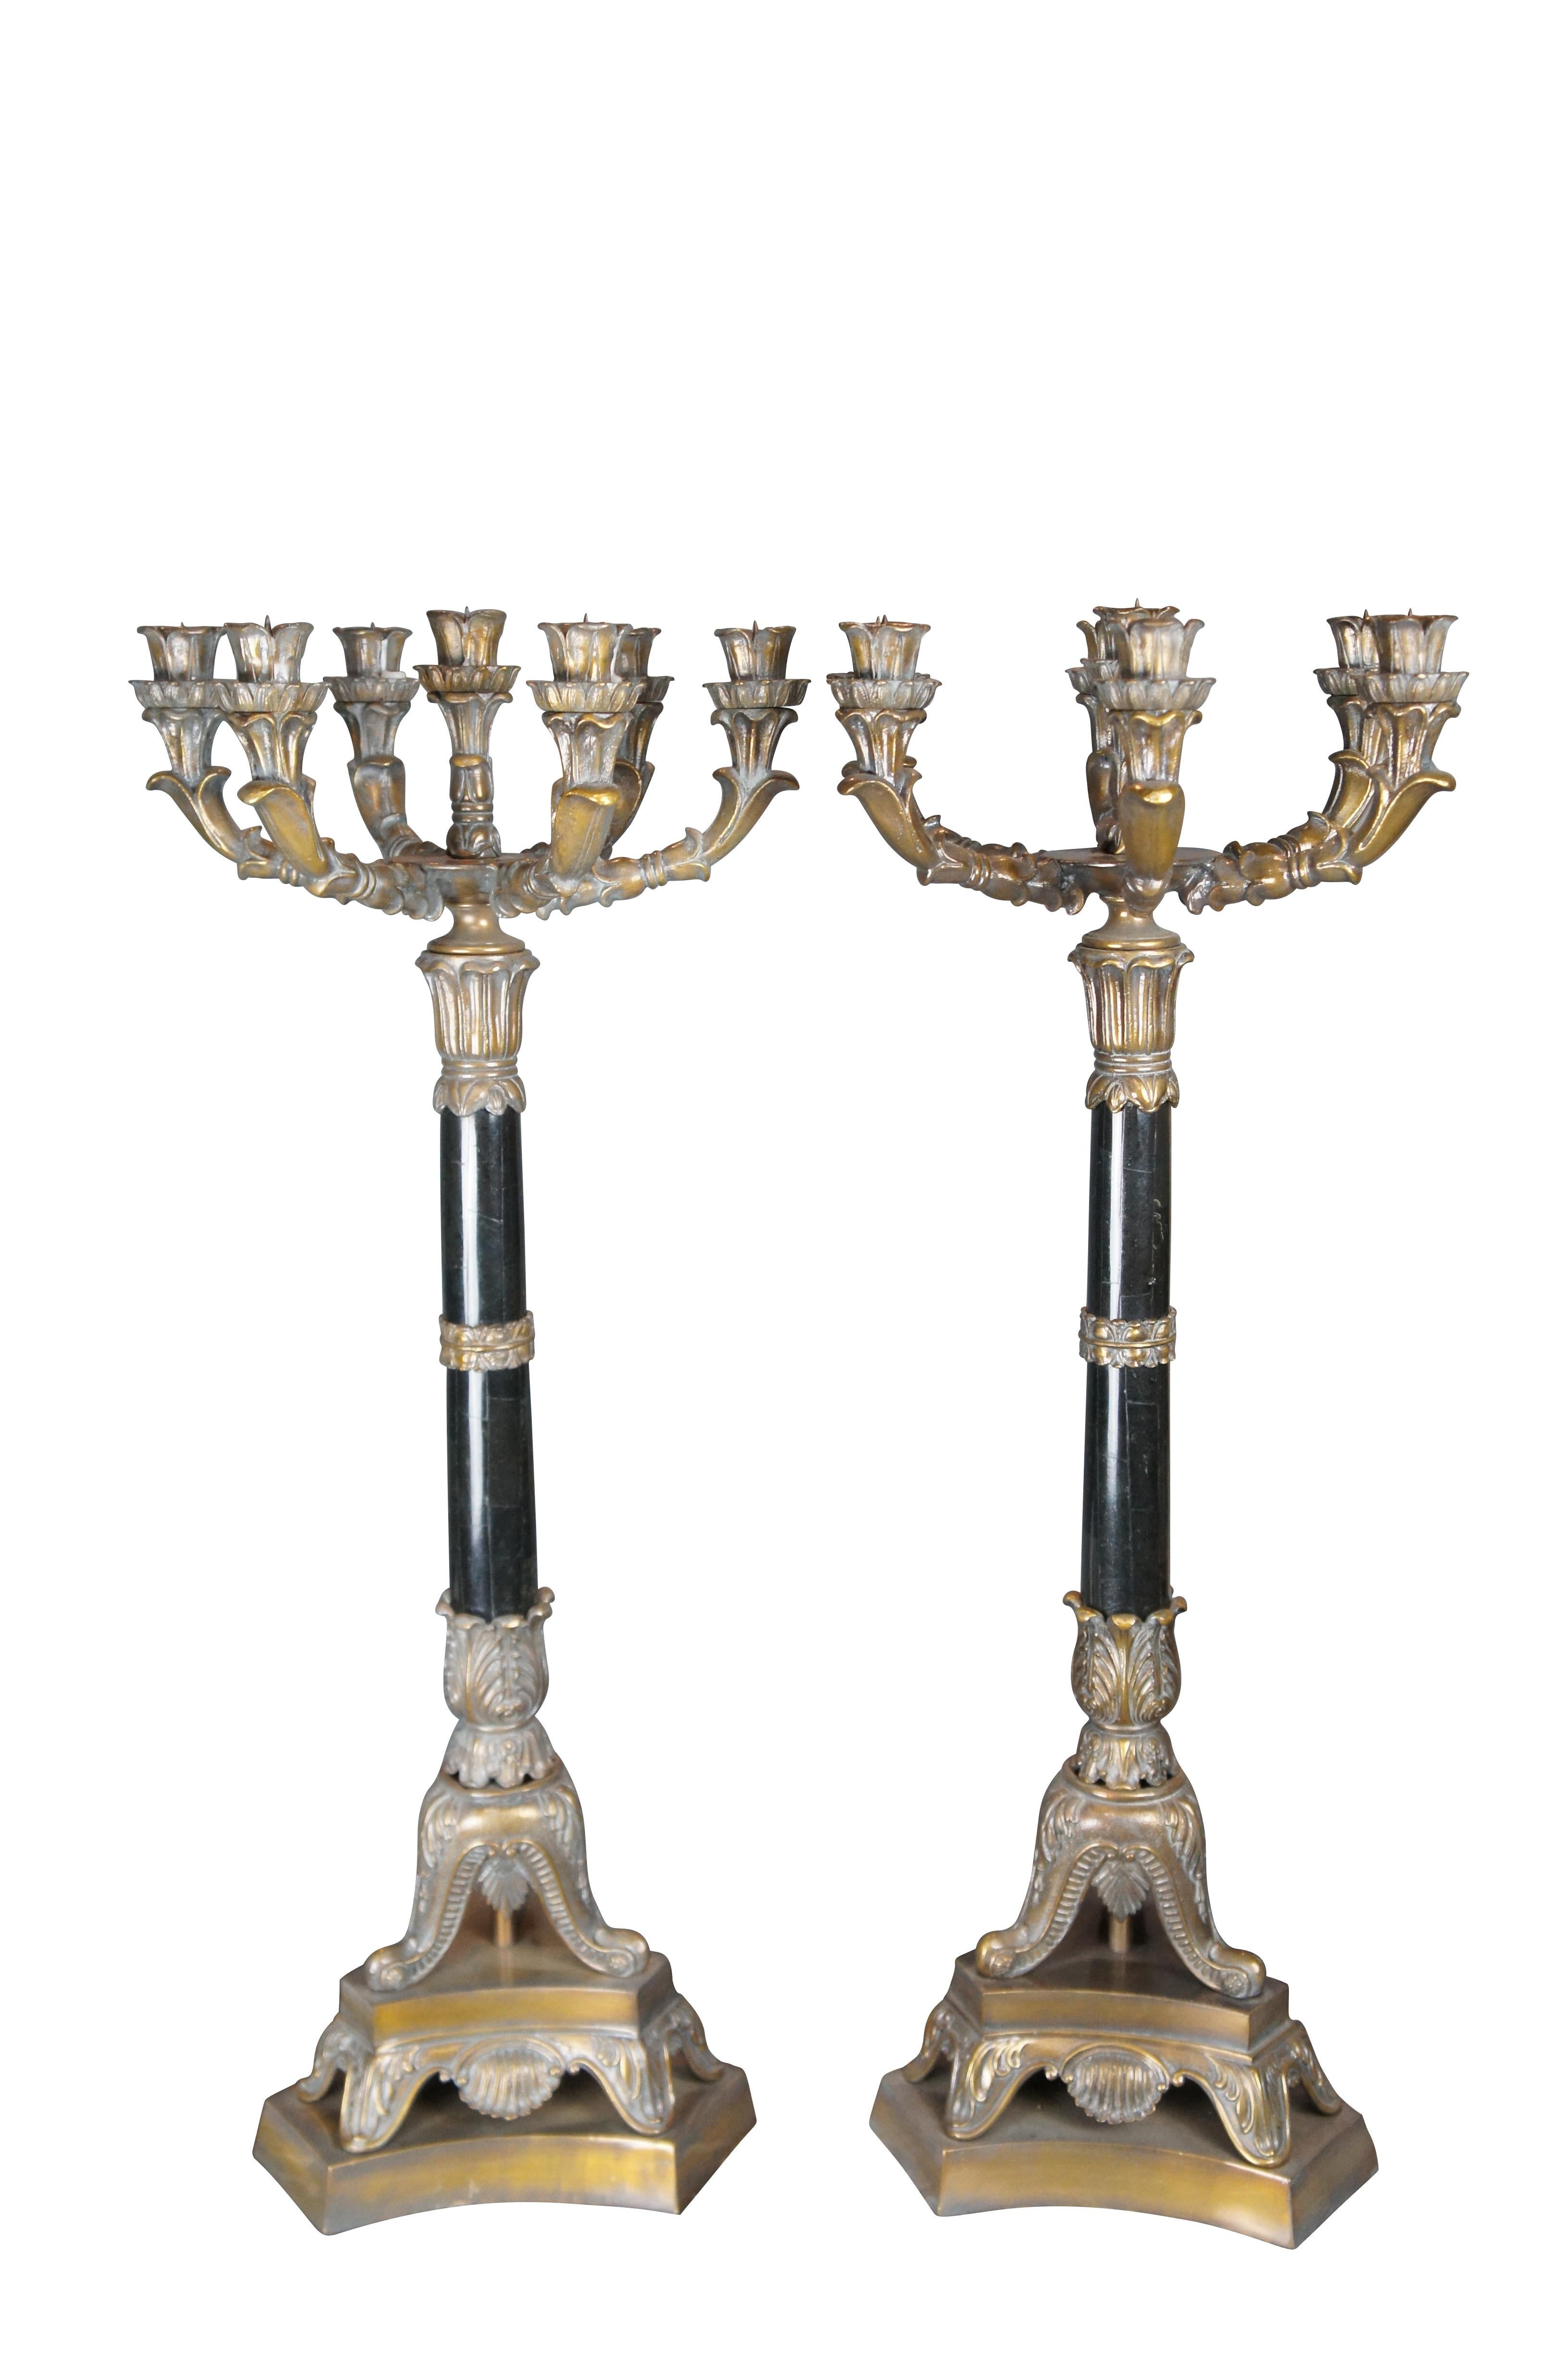 A large pair of Maitland Smith candlesticks, circa last quarter 20th century. Features French styling with exceptional craftmanship. Each candle holder is made from bronze with a seven light candelabra along the top over a central Grecian column